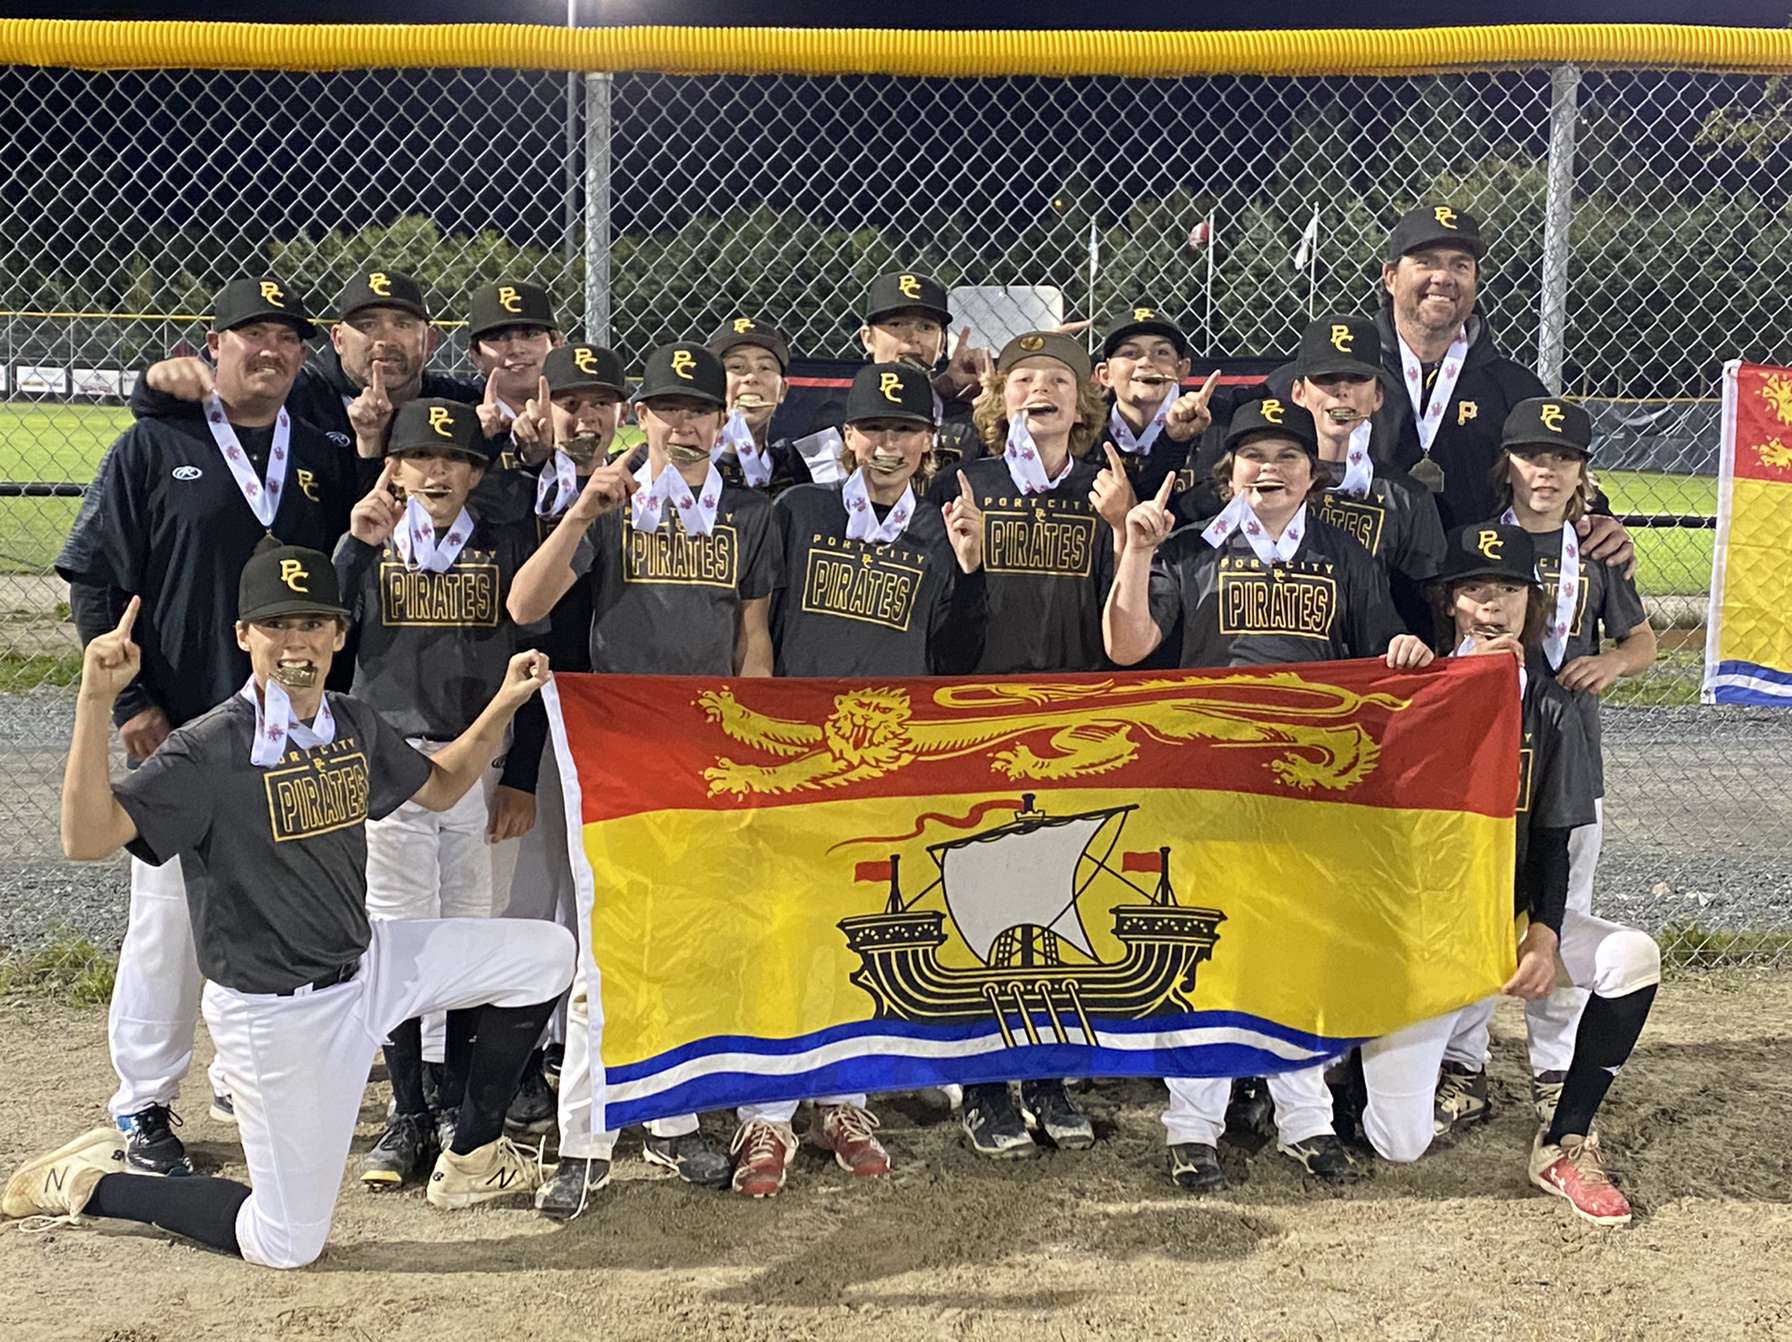 National Championships: Port City reigns victorious at 13U National Atlantic Championships